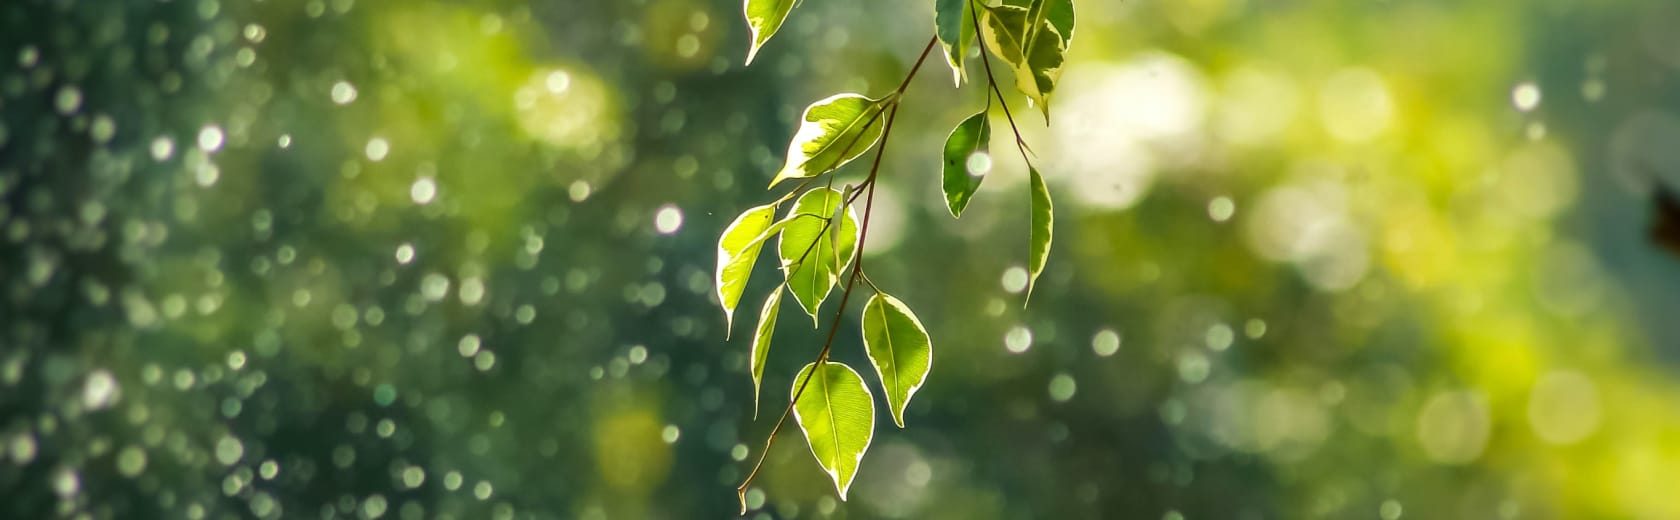 A green lush branch moves in the wind and rain